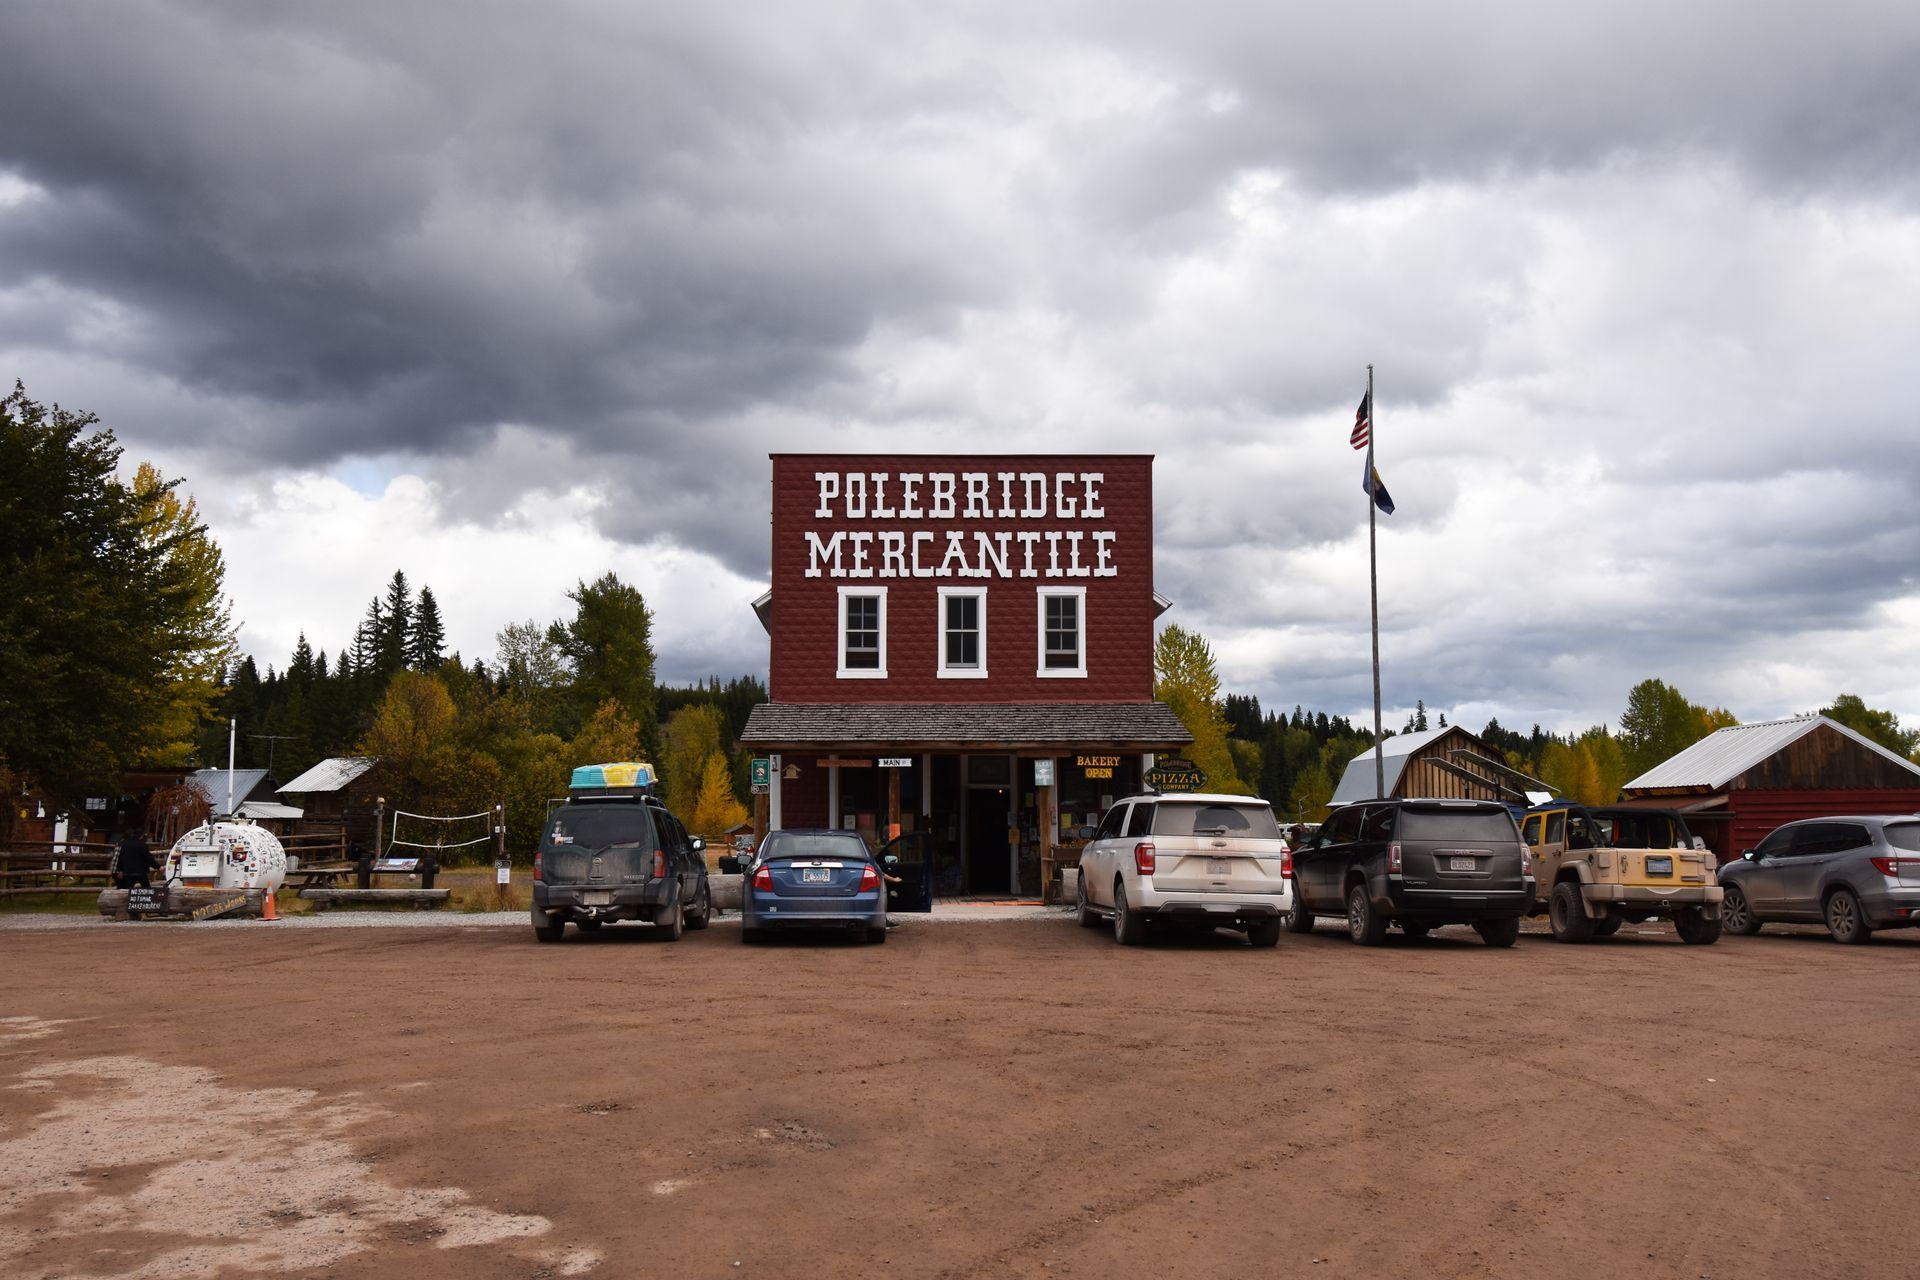 A red brick building with the words "Polebridge Mercantile" attached in white. There are several cars parked in front of the small bakery.